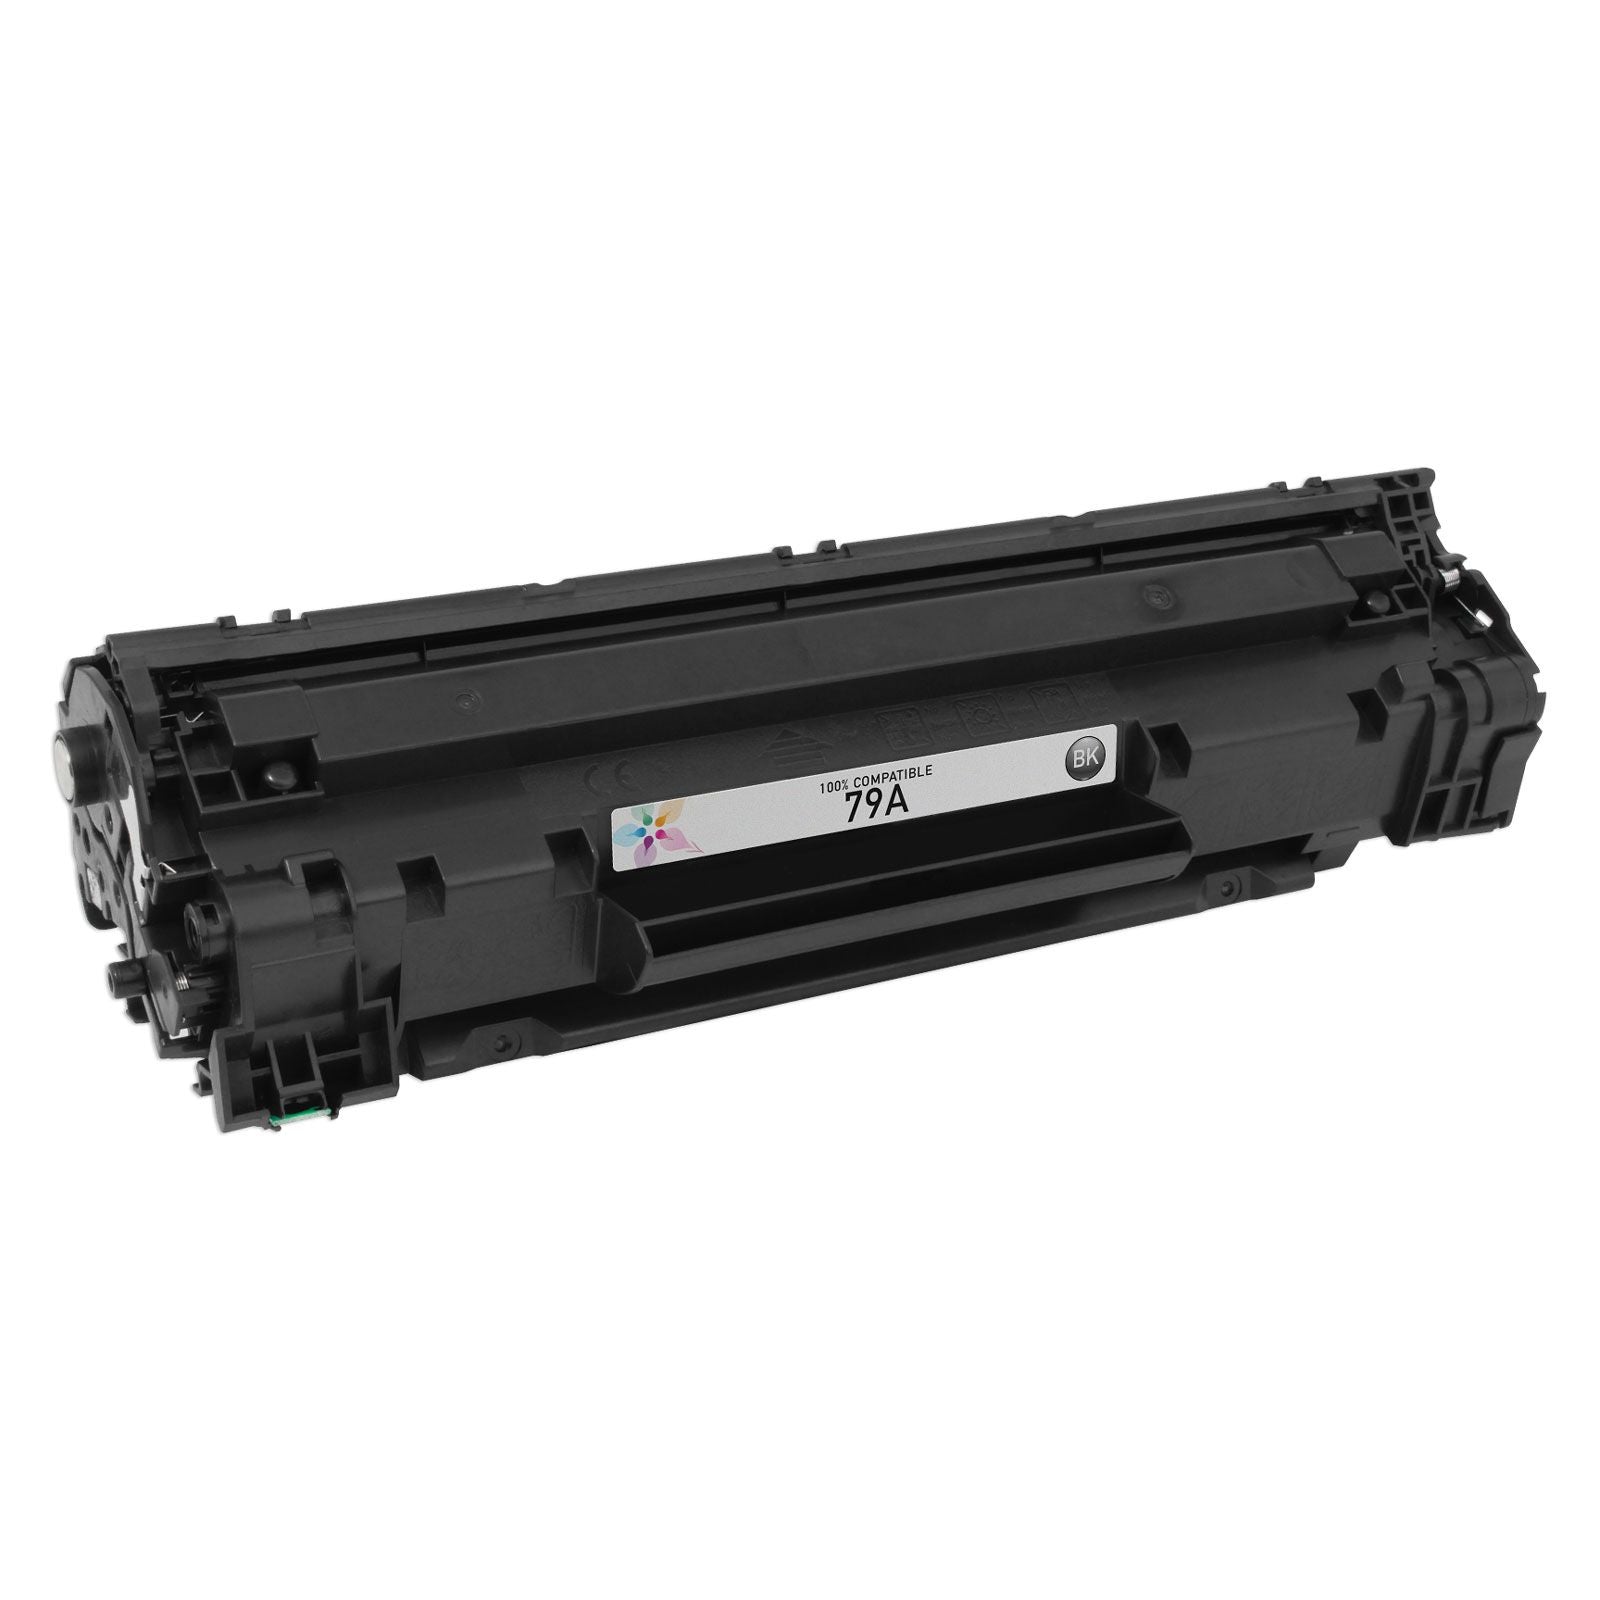 IMPERIAL BRAND Compatible toner cartridge for HP 79A CF279A Jumbo TONER 2,500 PAGES